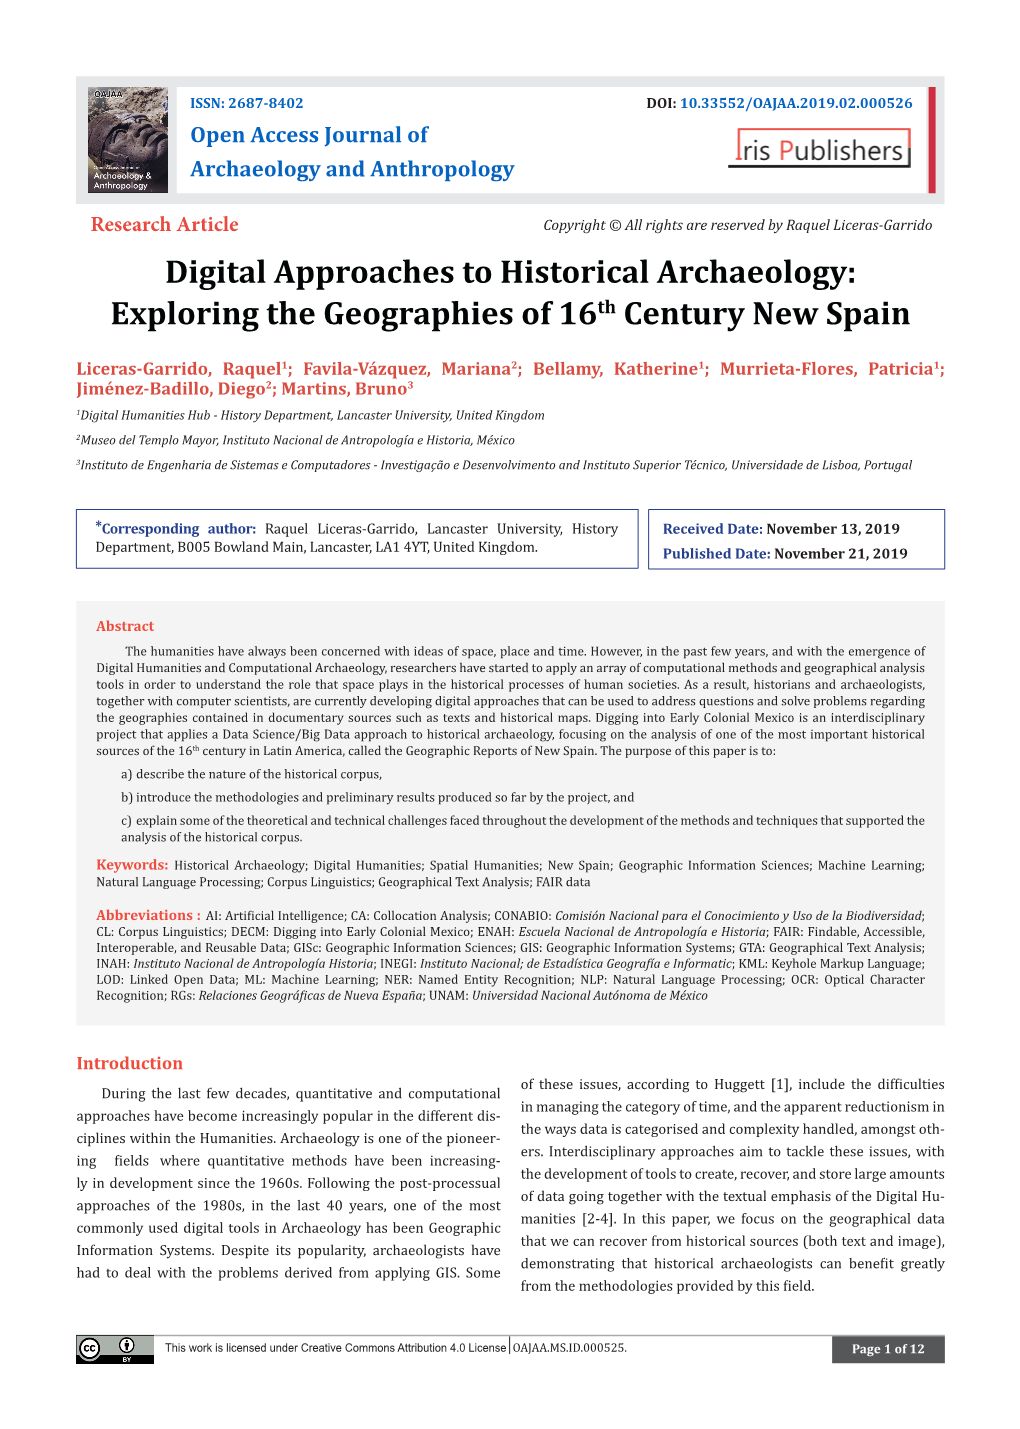 Digital Approaches to Historical Archaeology: Exploring the Geographies of 16Th Century New Spain